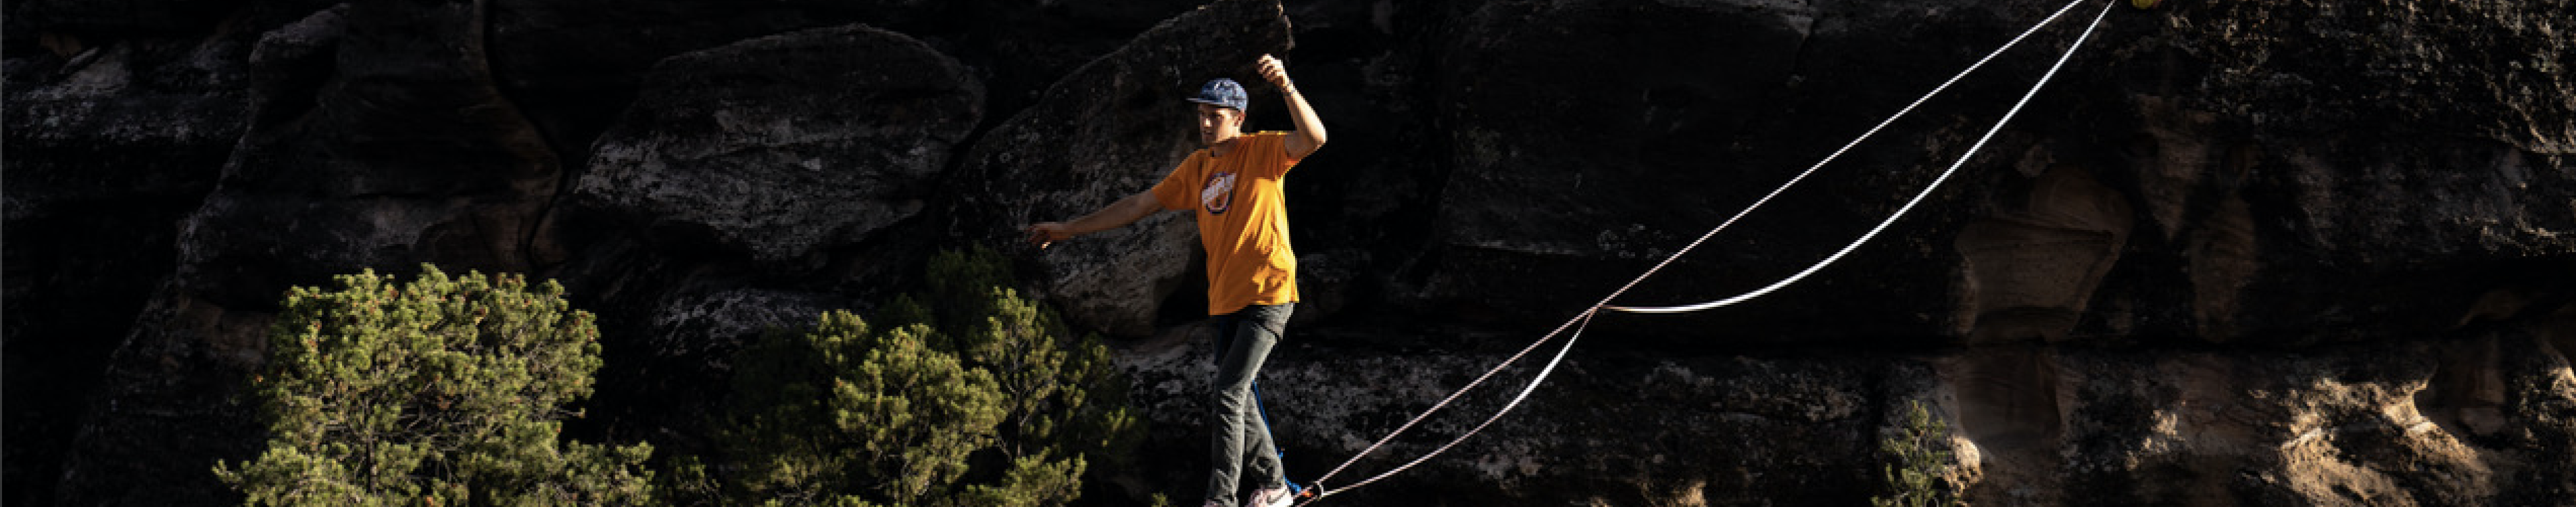 A person walking across a tightrope between two cliffs